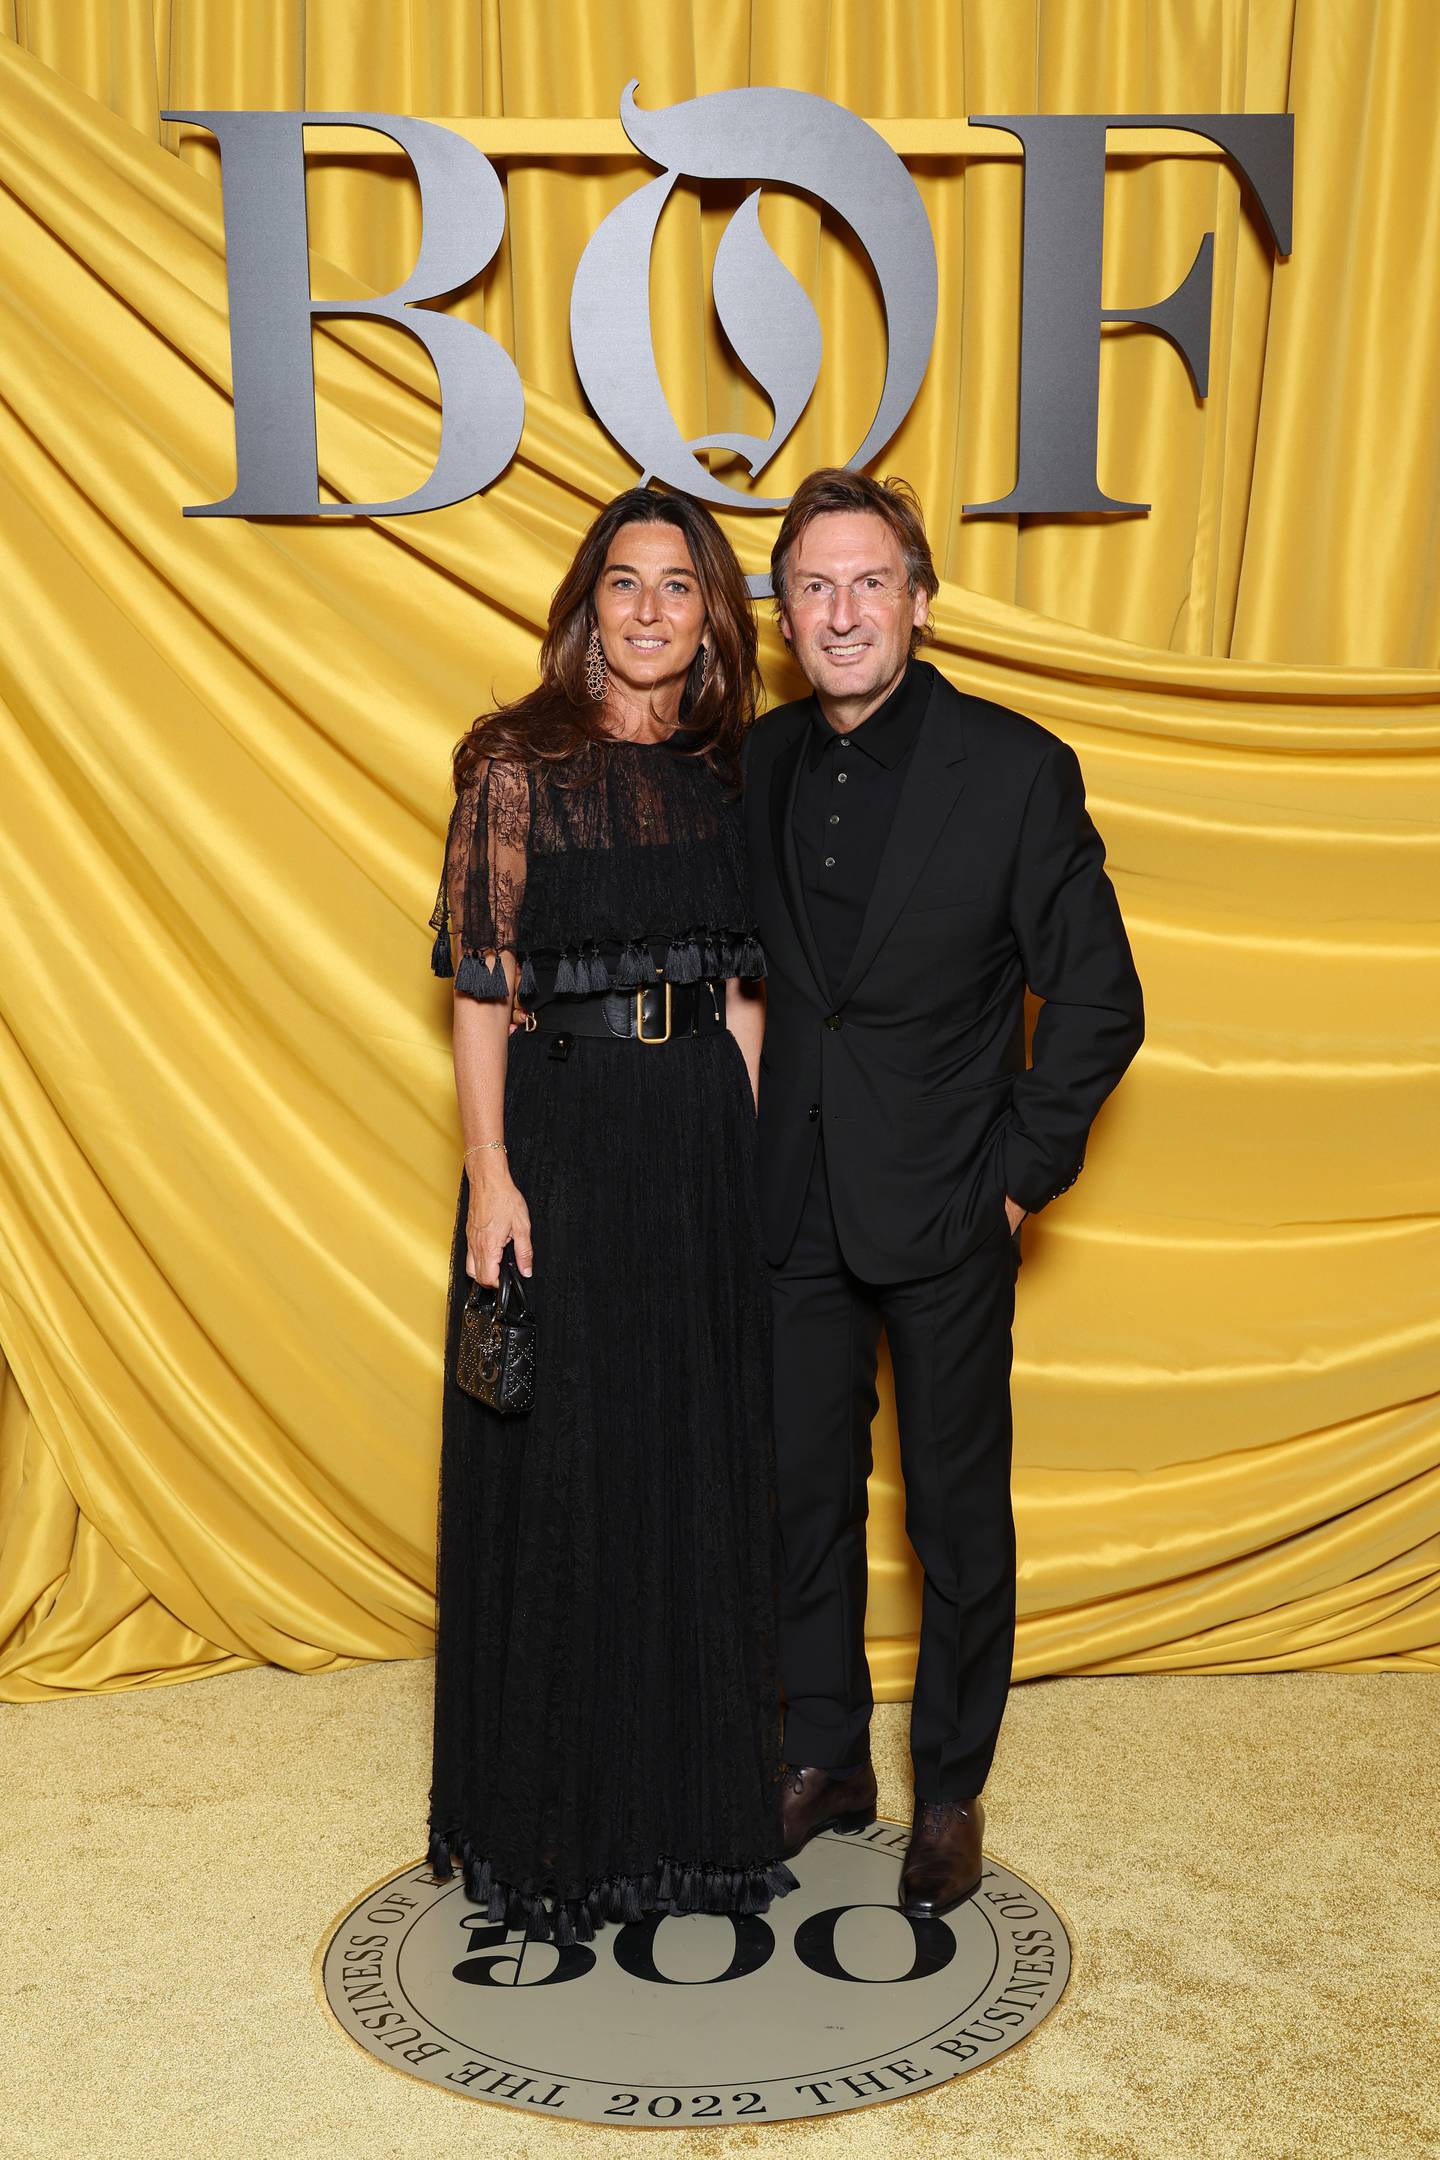 Elisabetta Beccari and Pietro Beccari, chairman and chief executive, from Italy attend the #BoF500 gala during Paris Fashion Week.